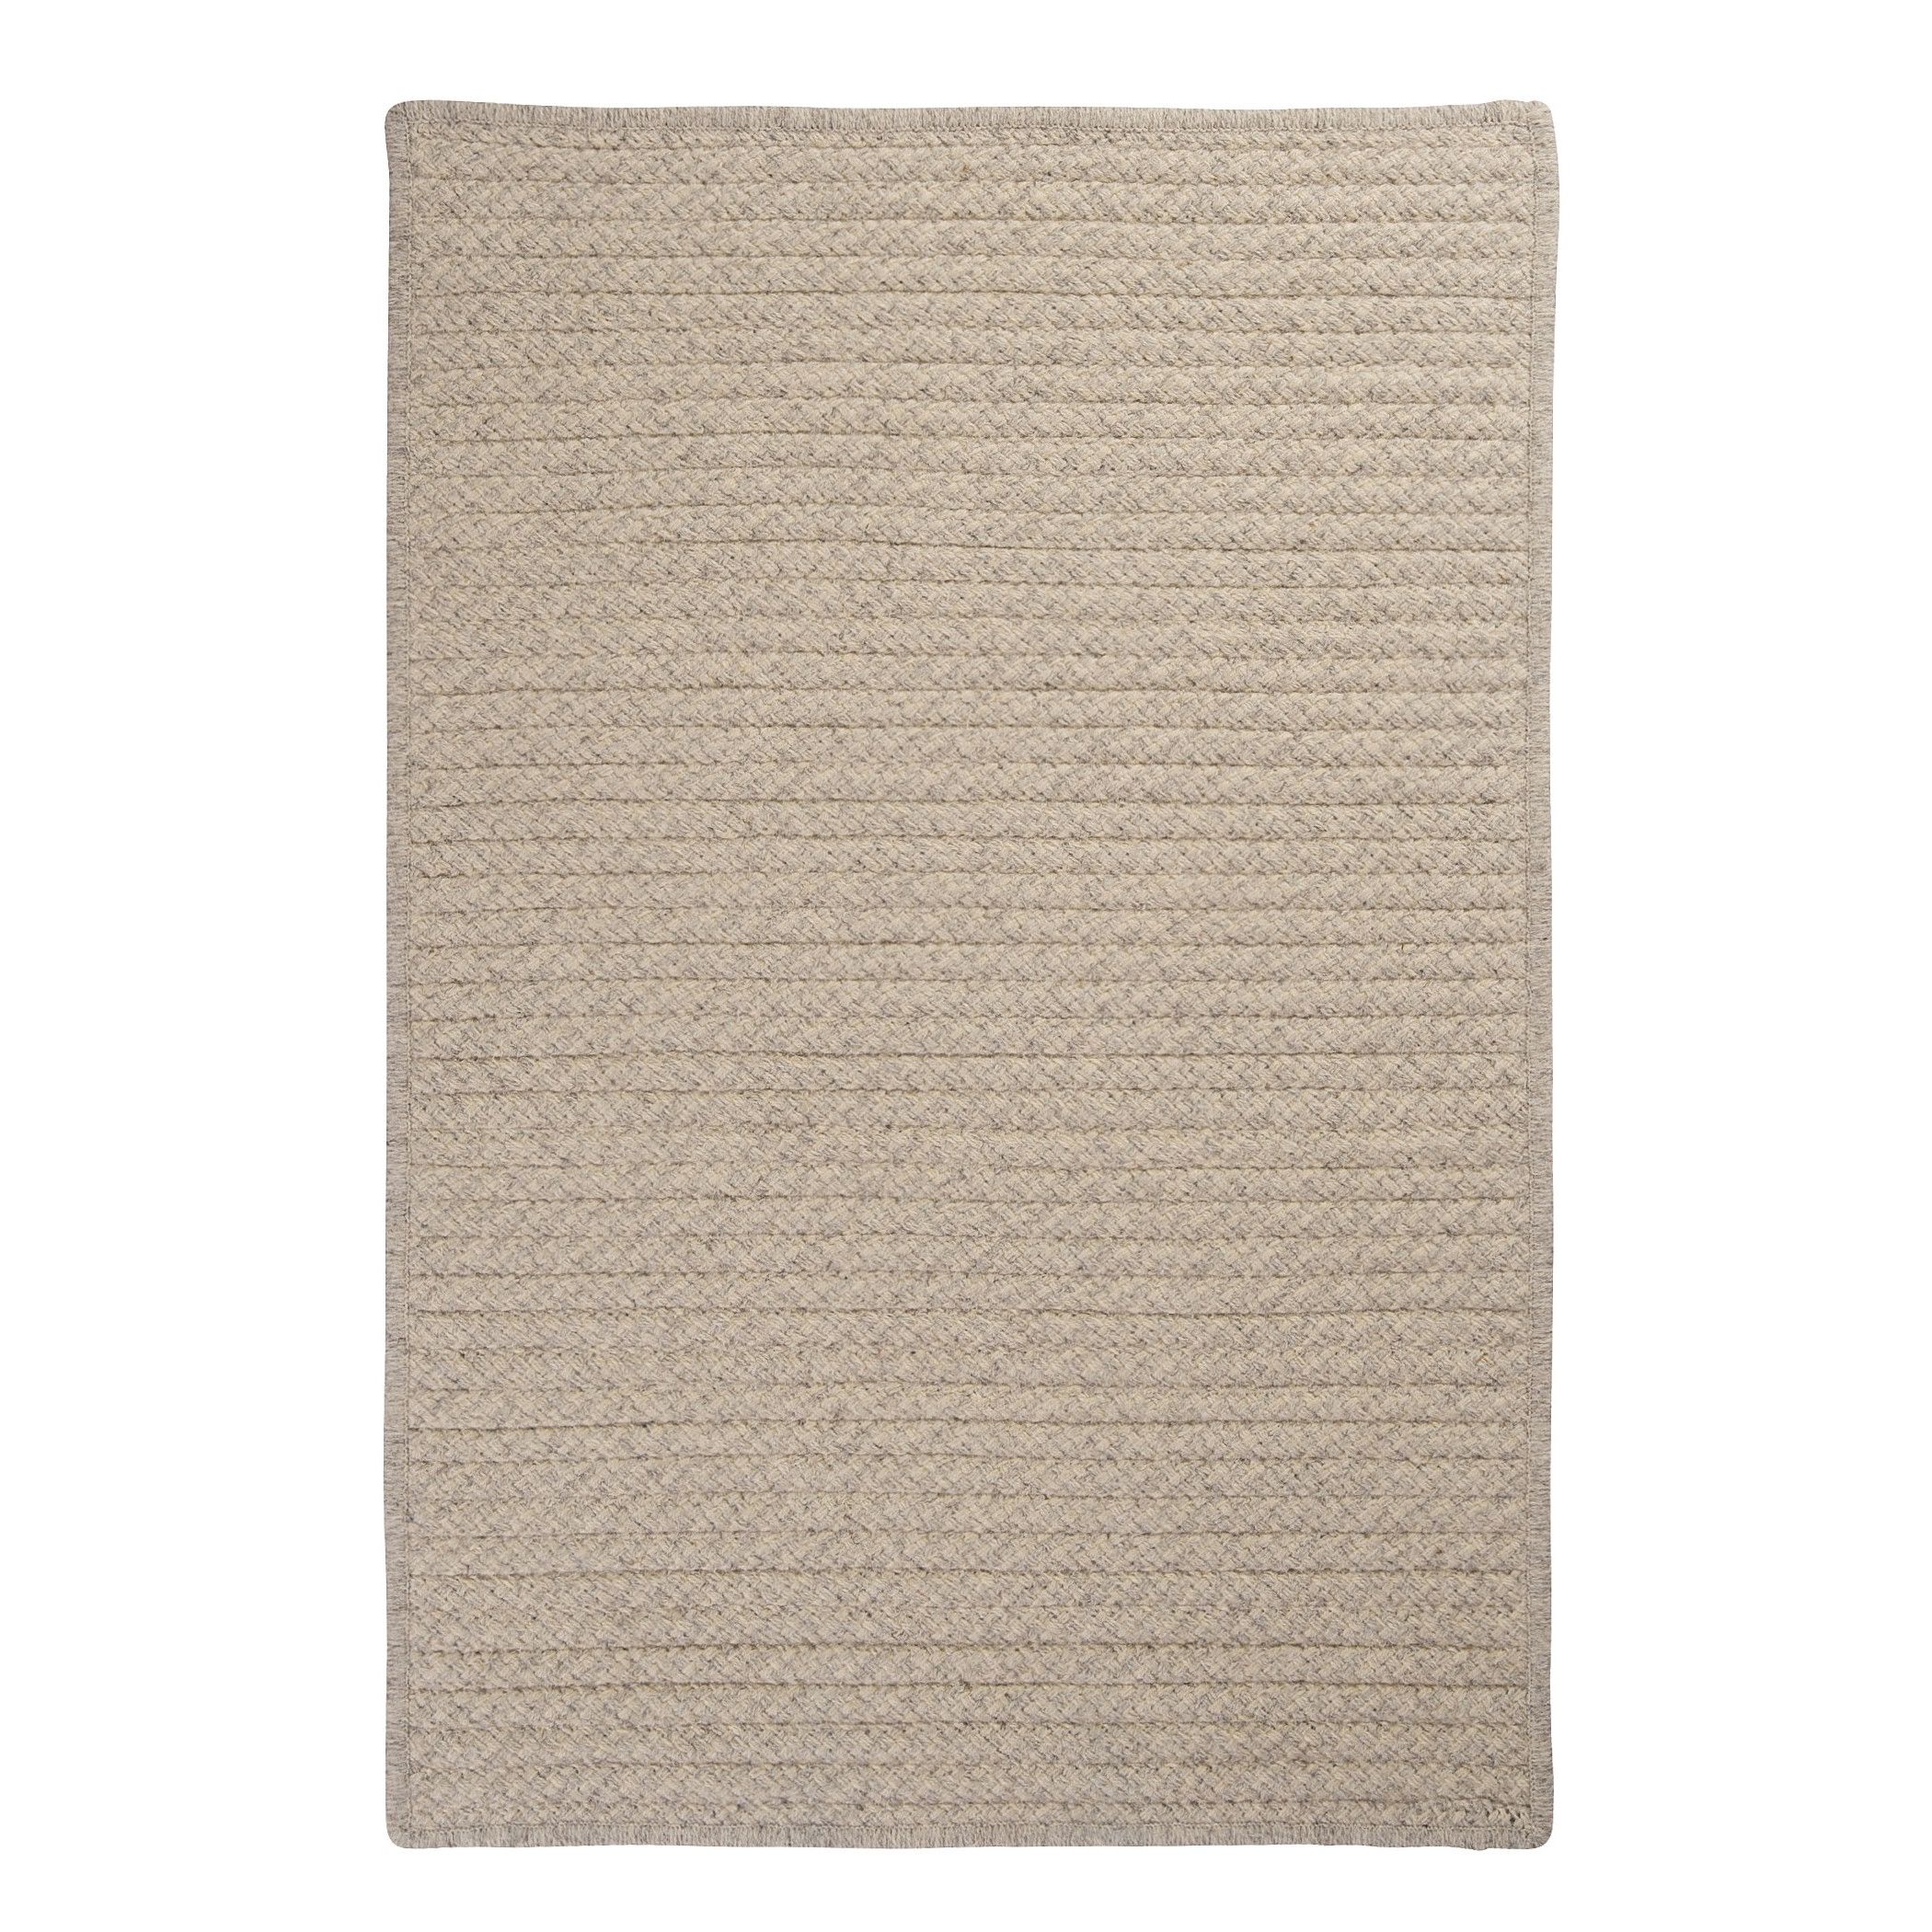 Wool Braided Area Rugs Square Grey Simple Minimalist Classic Inside Wool Braided Area Rugs (Photo 167 of 264)